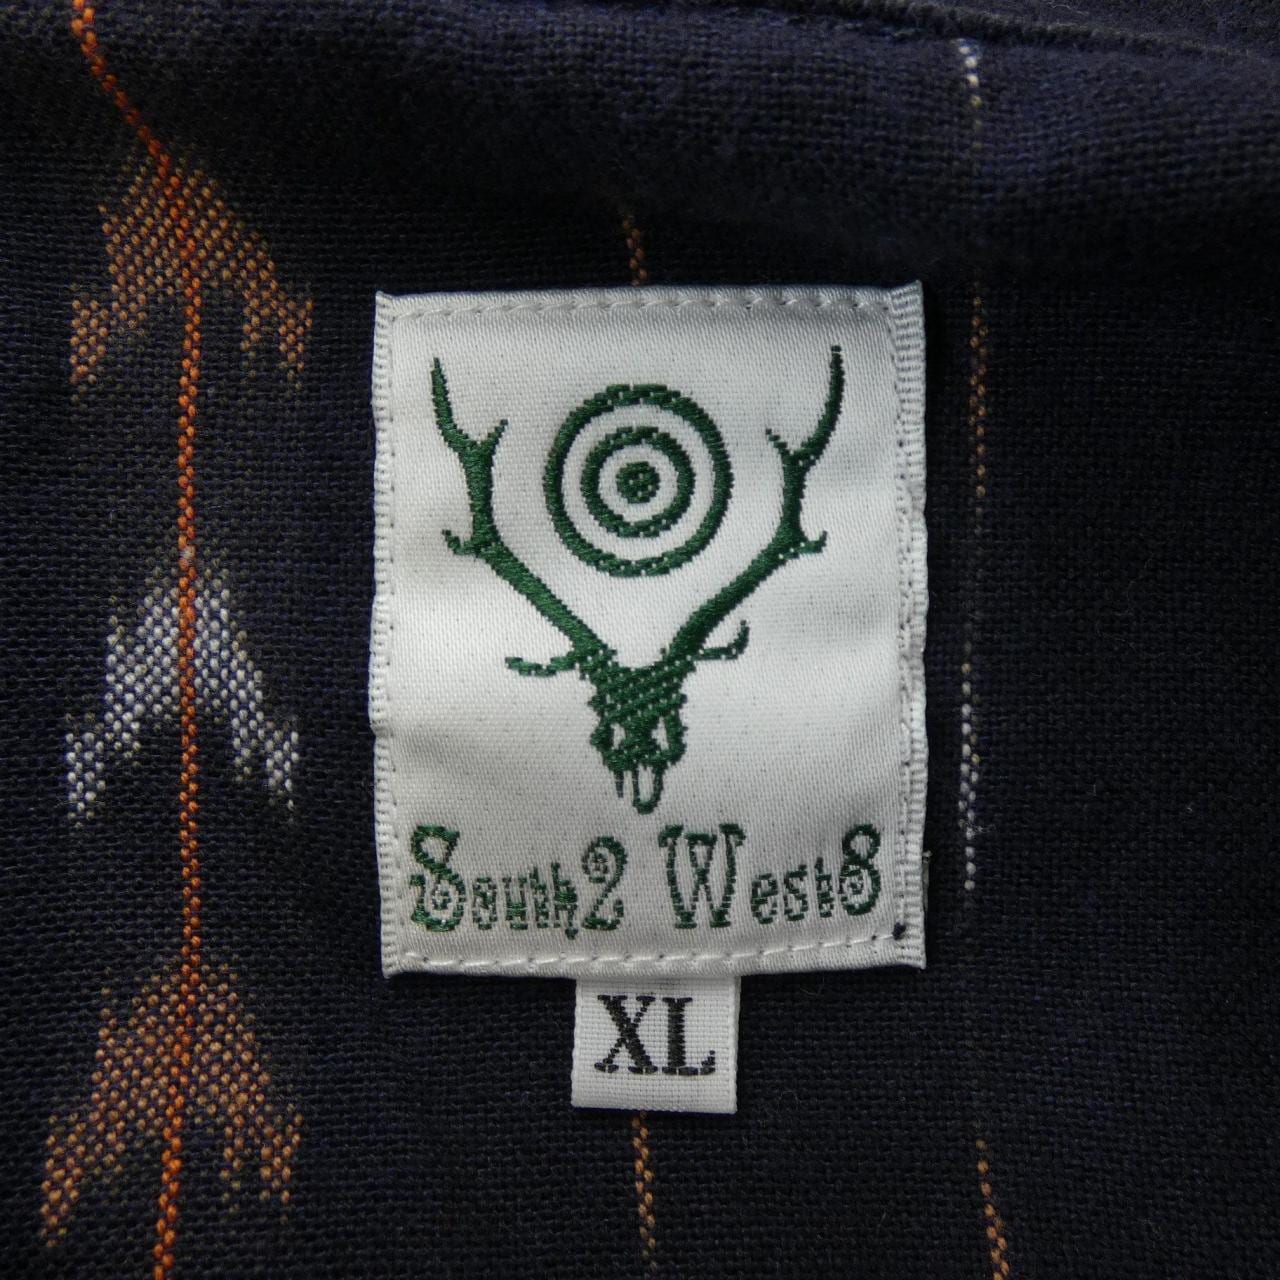 South Two West Eight SOUTH2 WEST8 Jacket